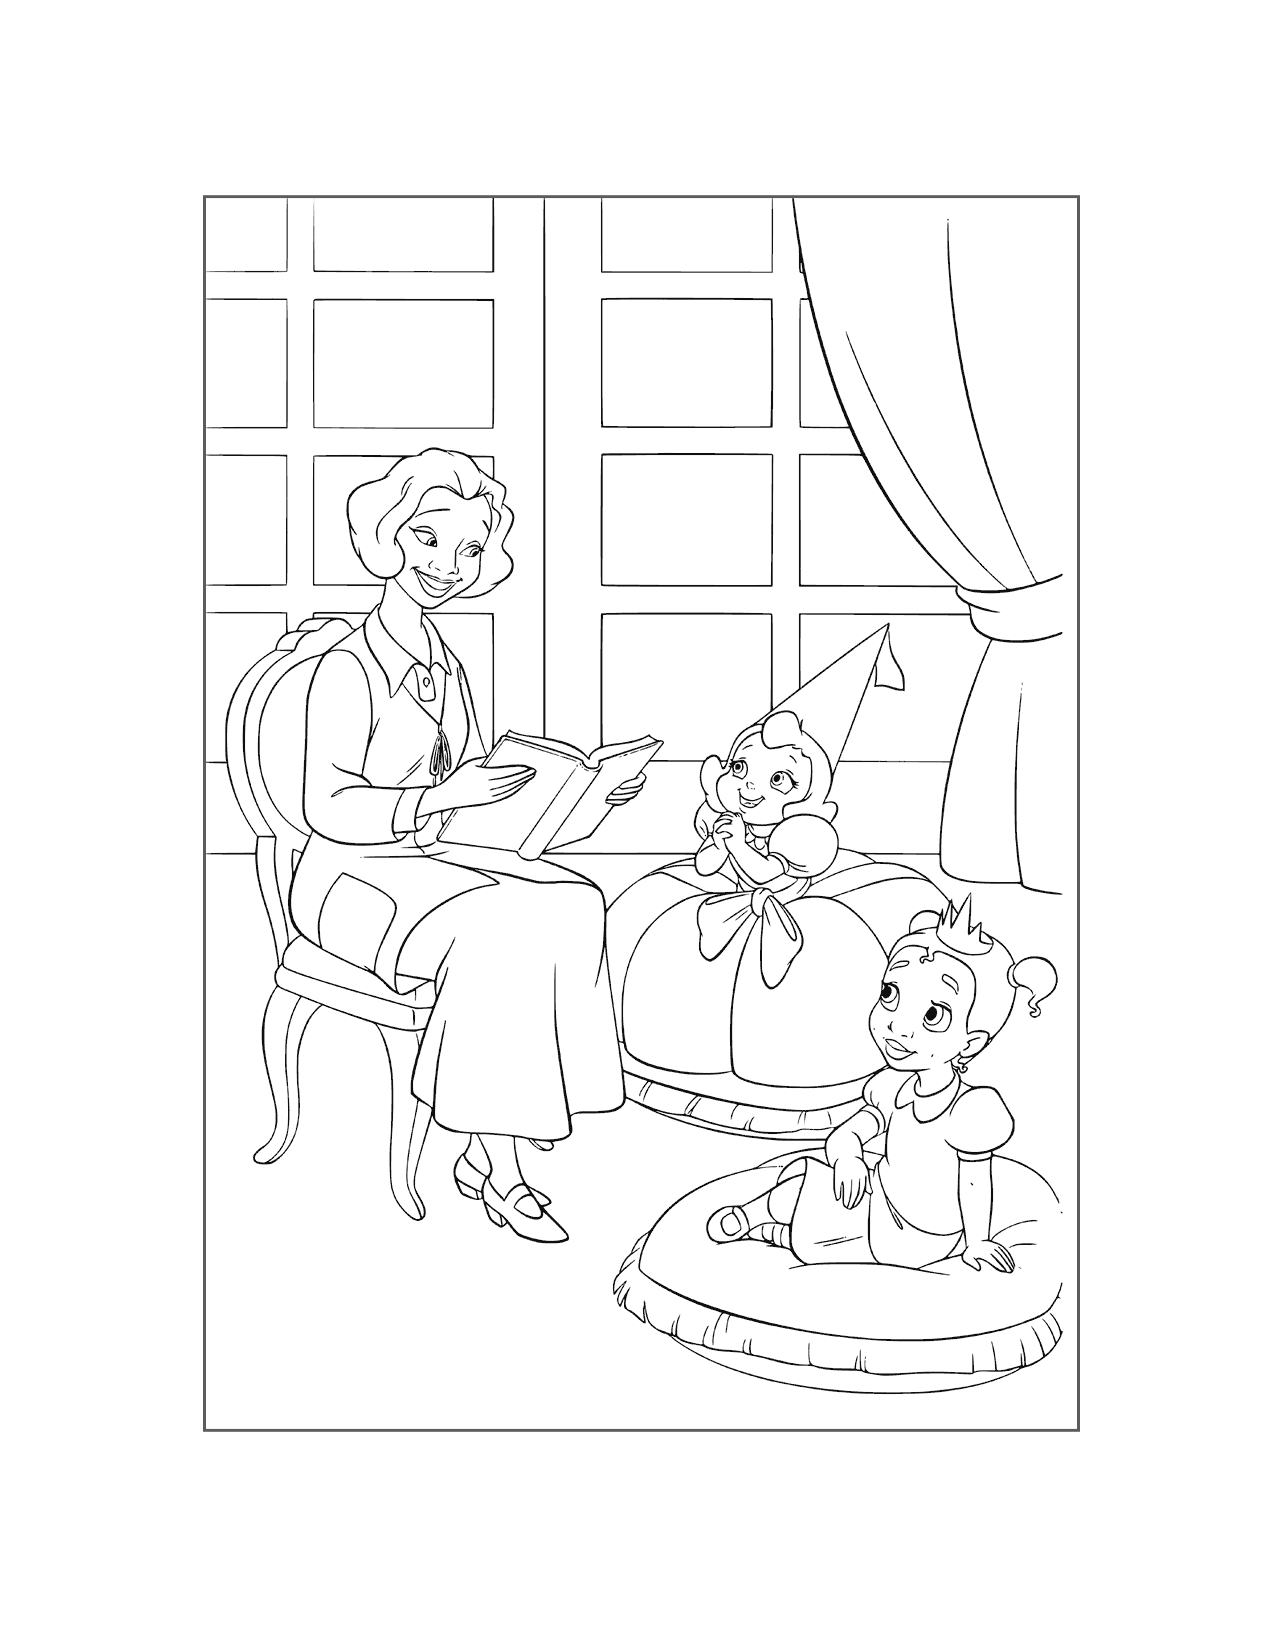 Tianas Mother Reads A Story Coloring Page